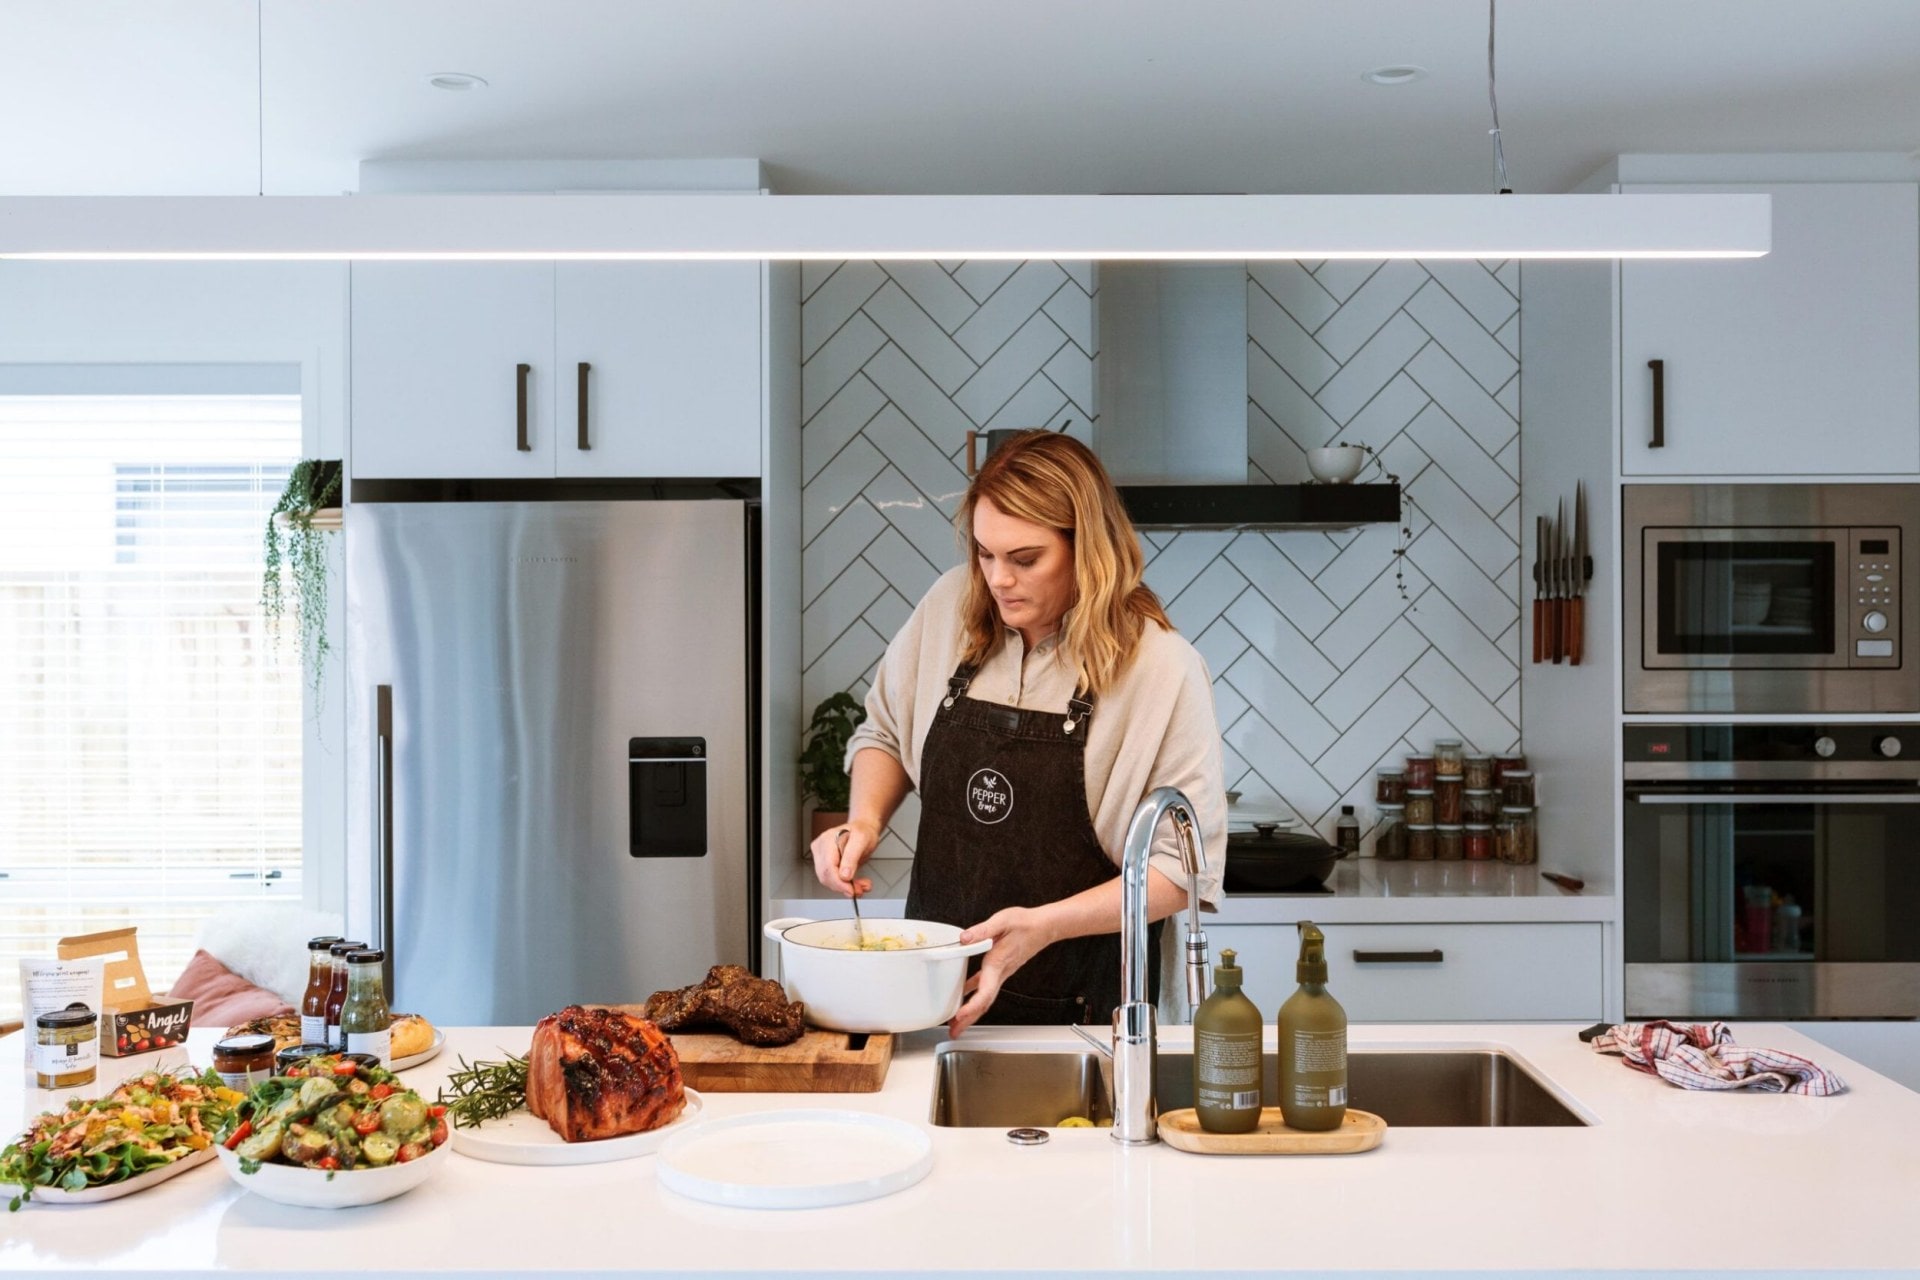 Cherie cooking in her kitchen that has white cabinets, black handles, and white herringbone tiles